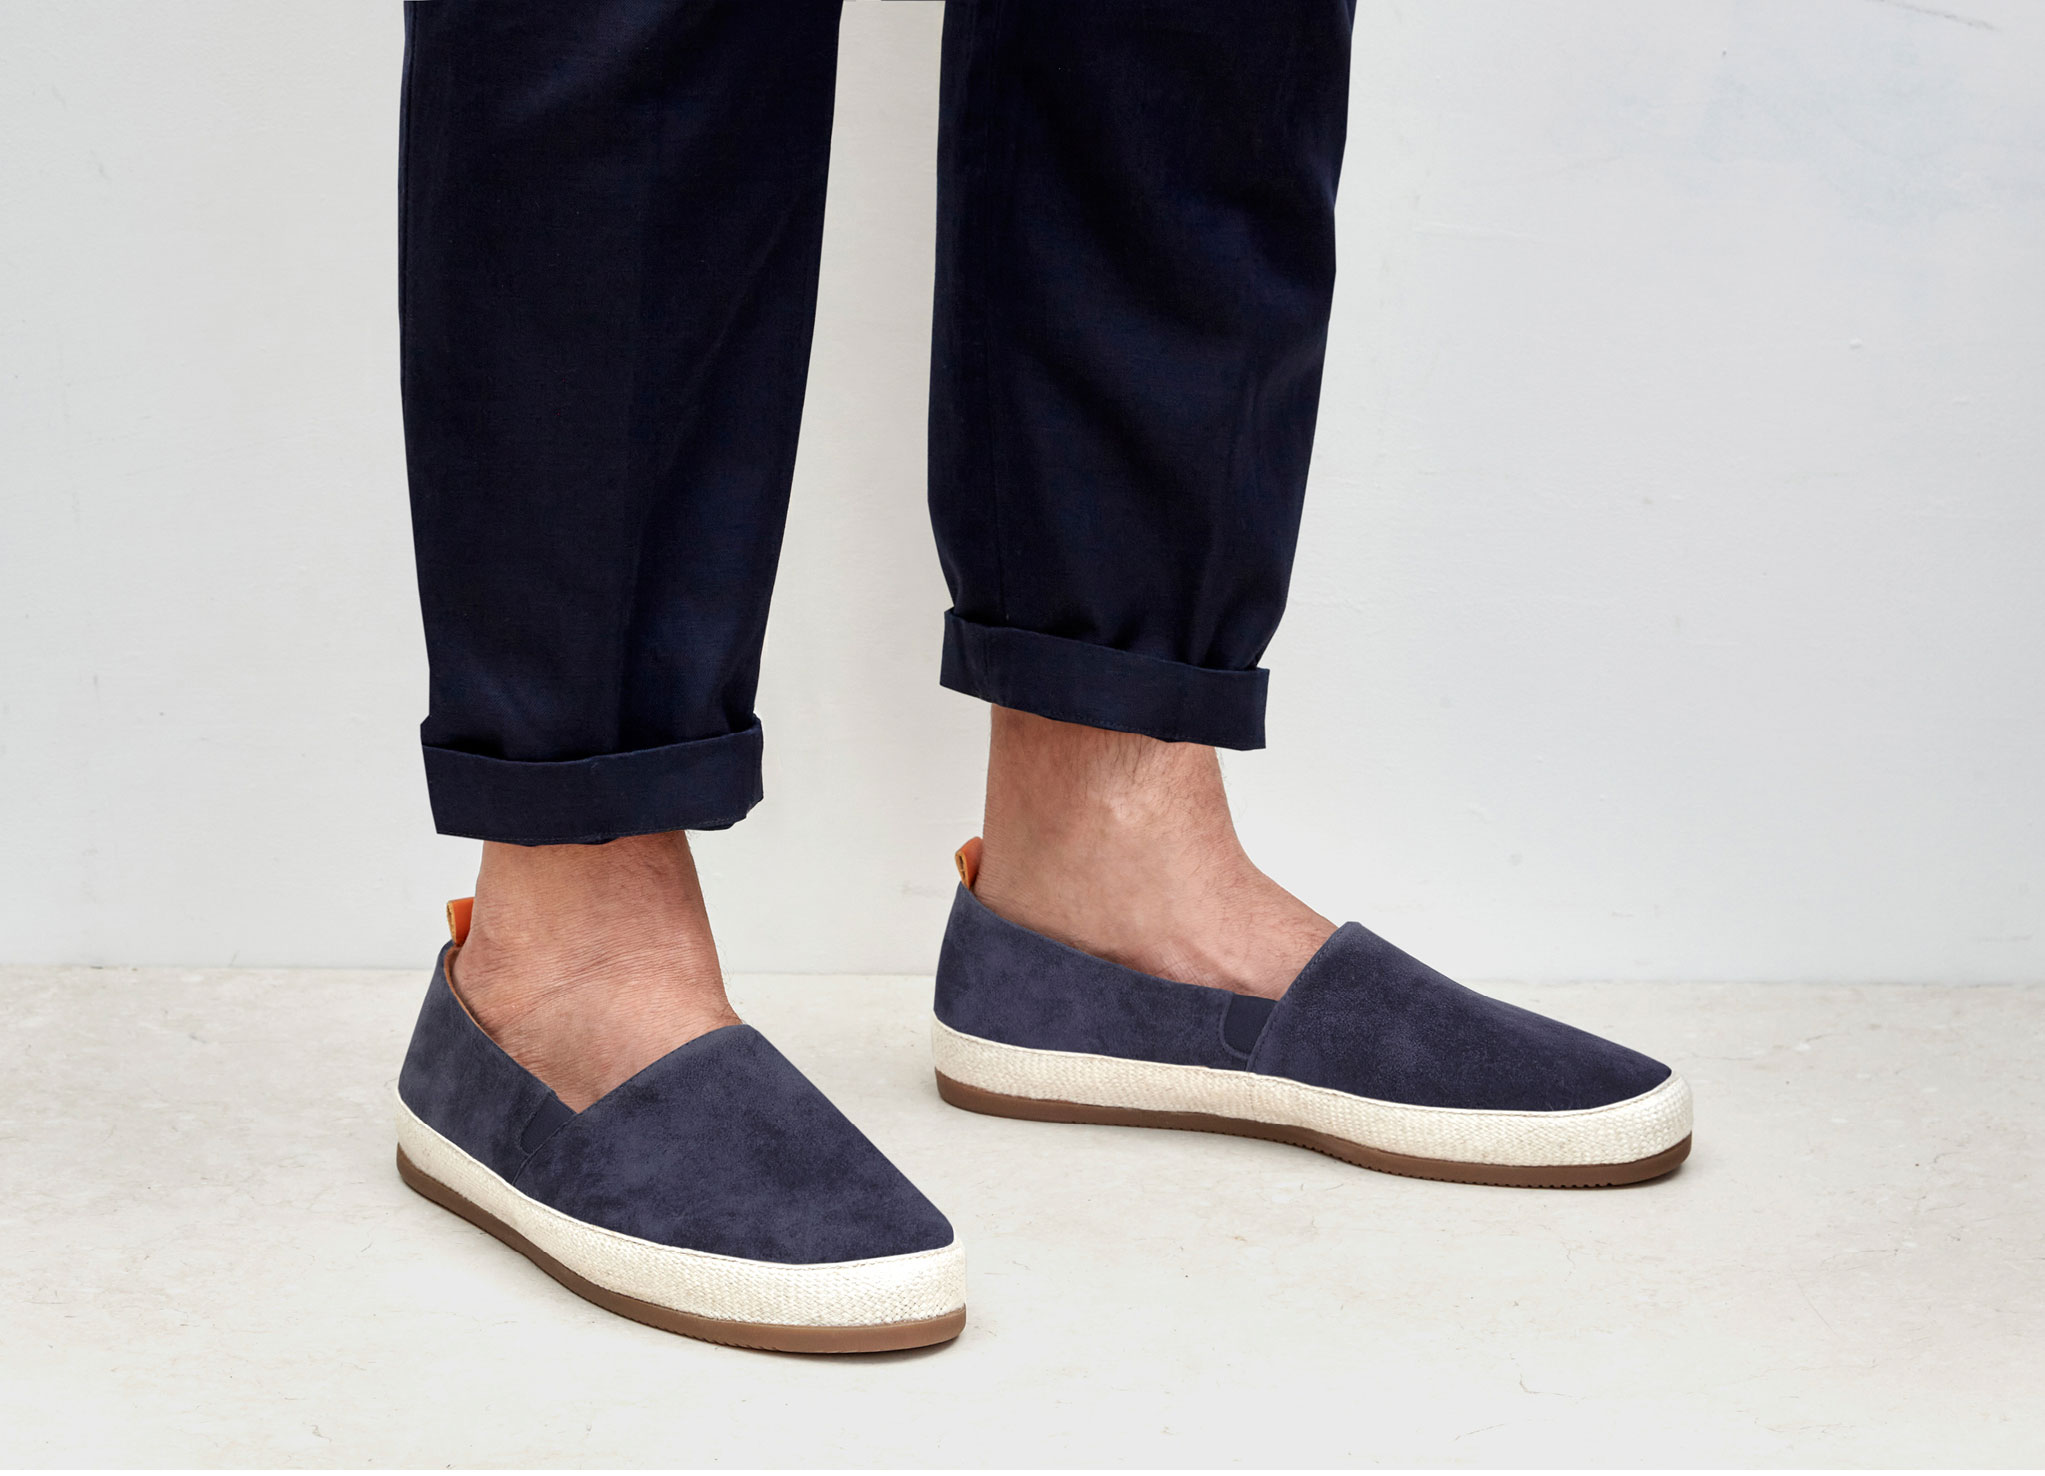 ego Australsk person arv Blue Espadrilles for Men | MULO Shoes | High-quality Suede Leather